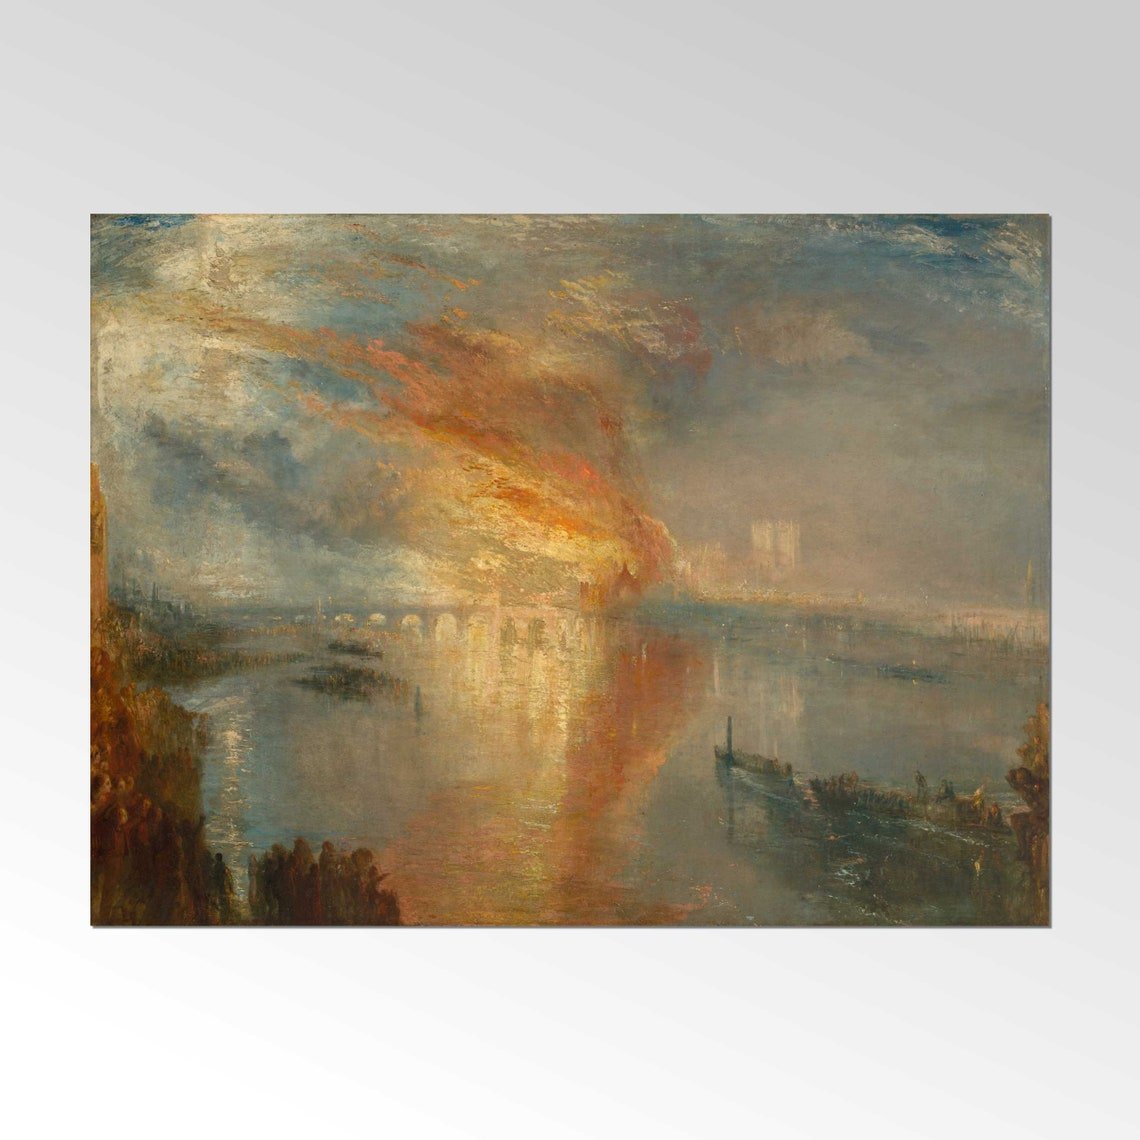 J. M. W. TURNER - The Burning Of The Houses of Parliament